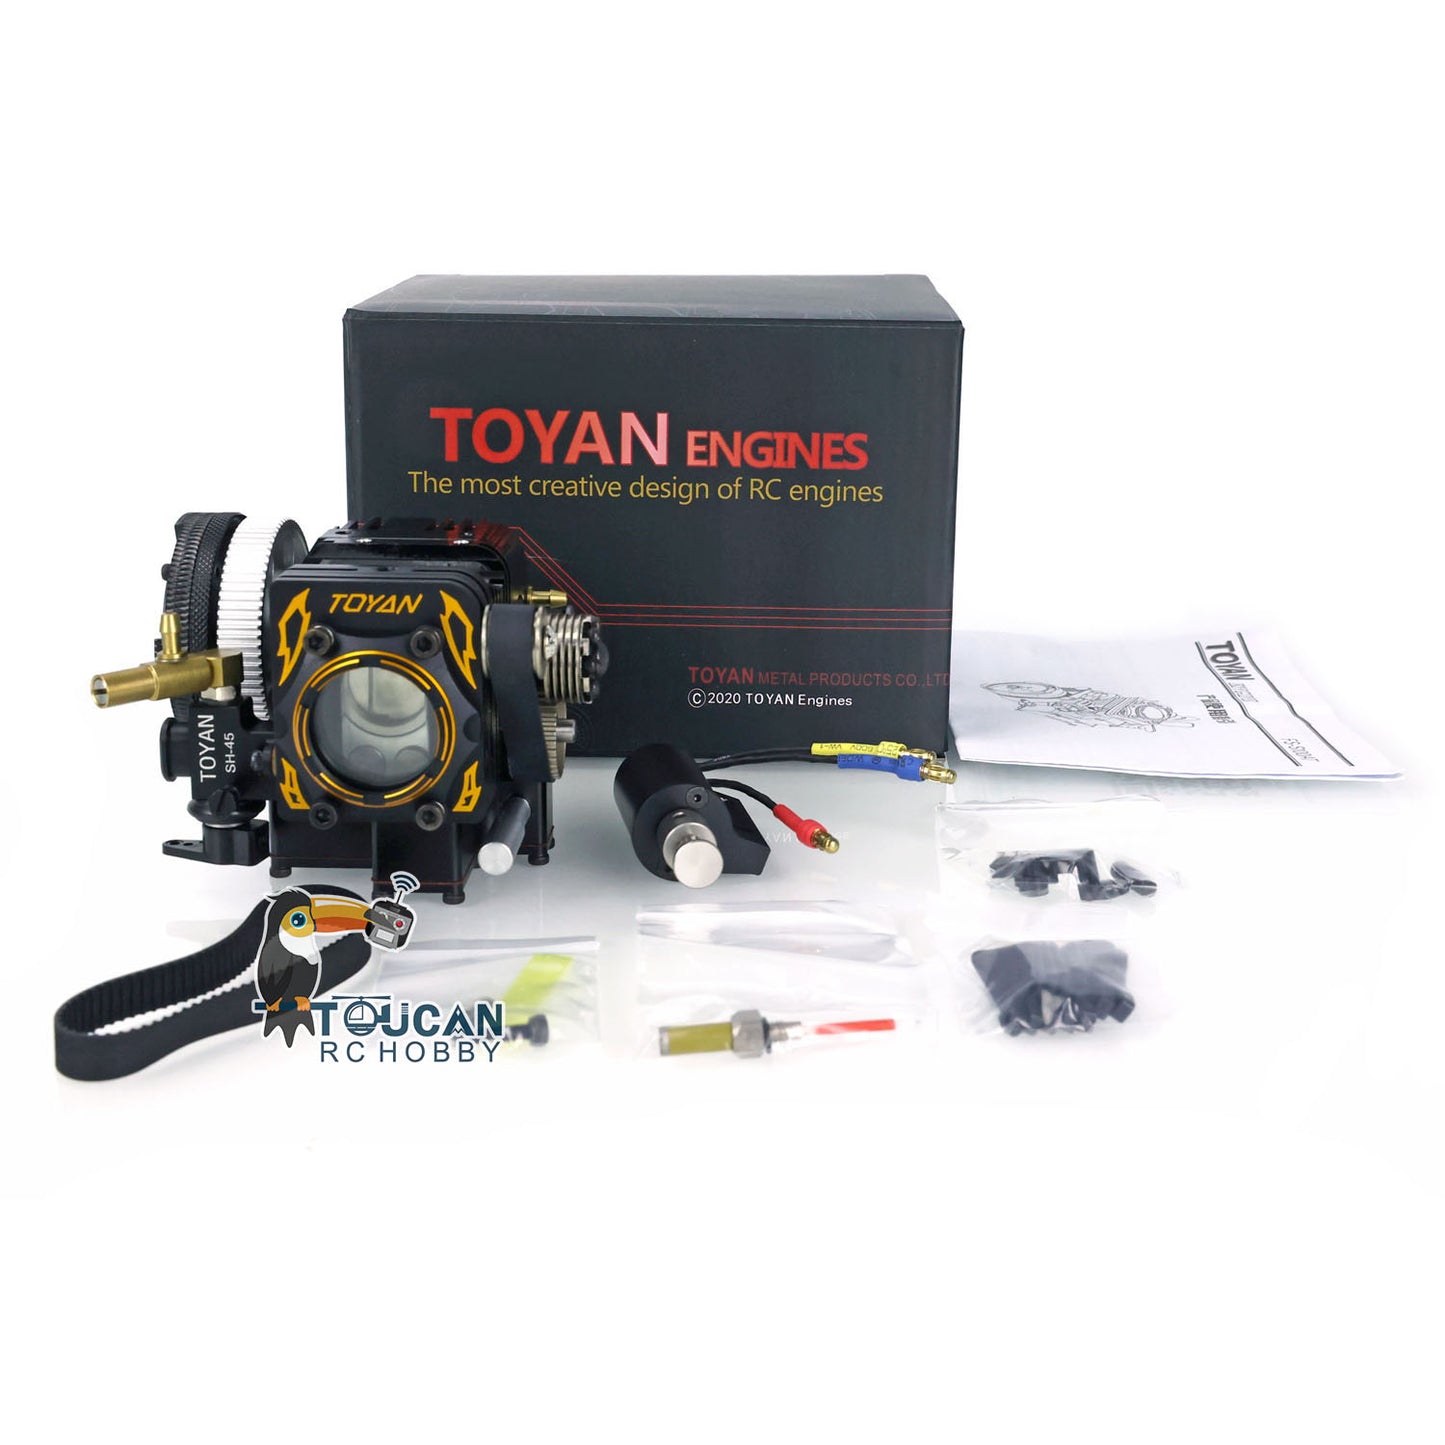 TOYAN FS-S100AT Gasoline Engine Single Cylinder 4 Strokes Mini Model for RC Car Air Cooling S100AT Motor Fan Blades Spark Plug